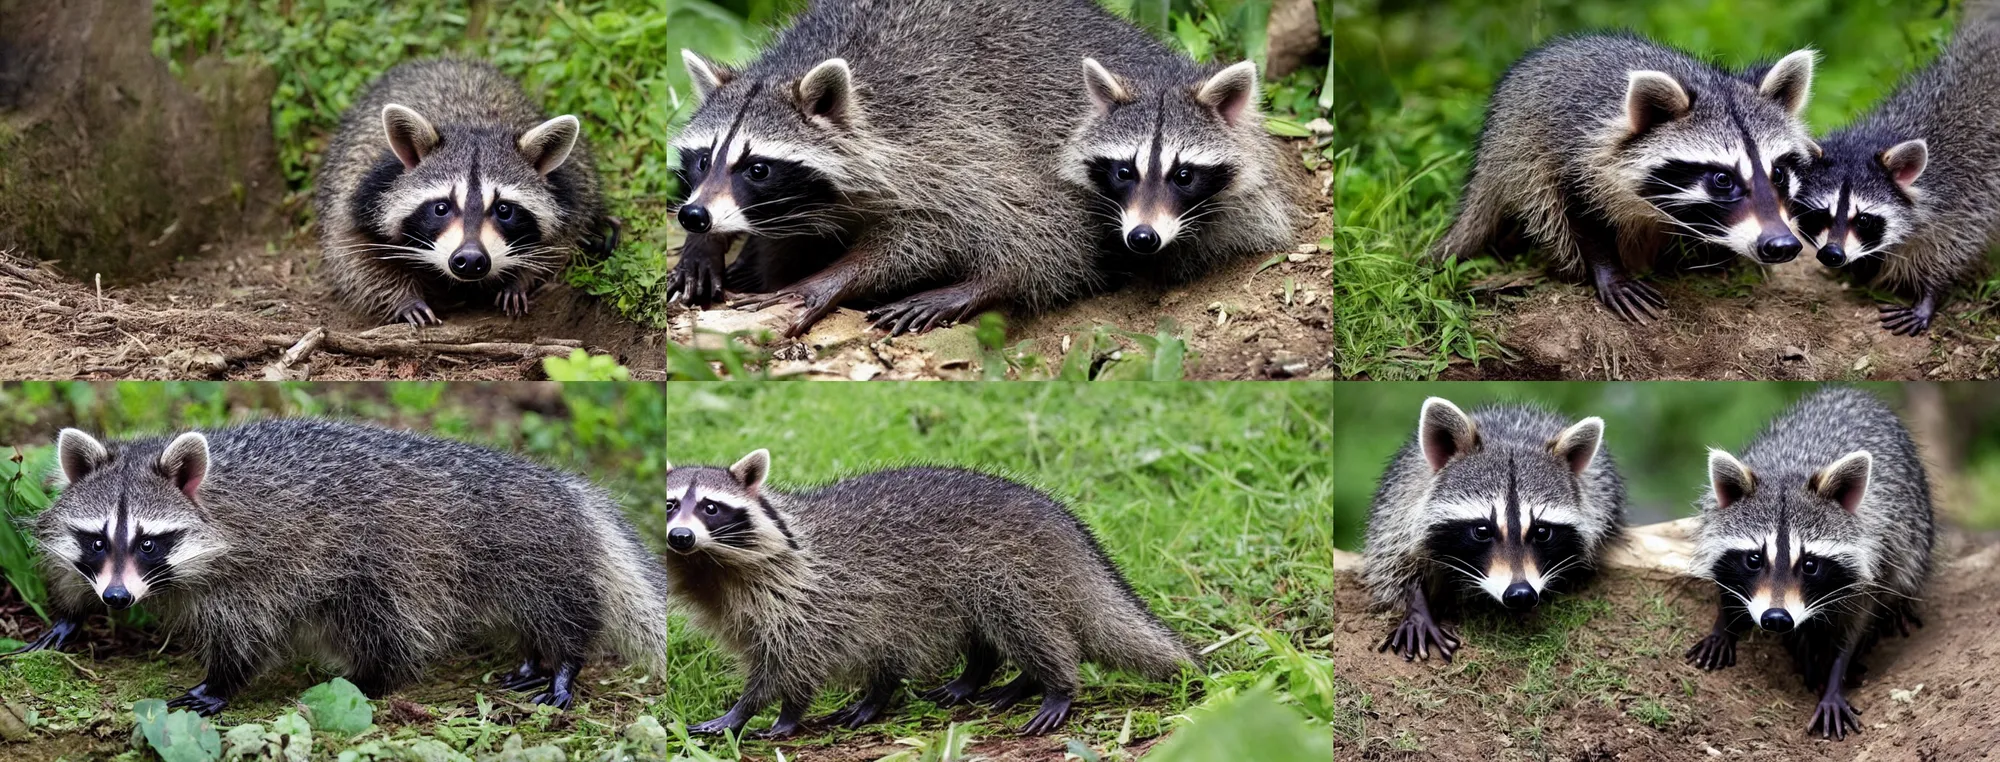 Prompt: a hybrid raccoon pig in a ditch, still from the BBC Earth documentary (2018)